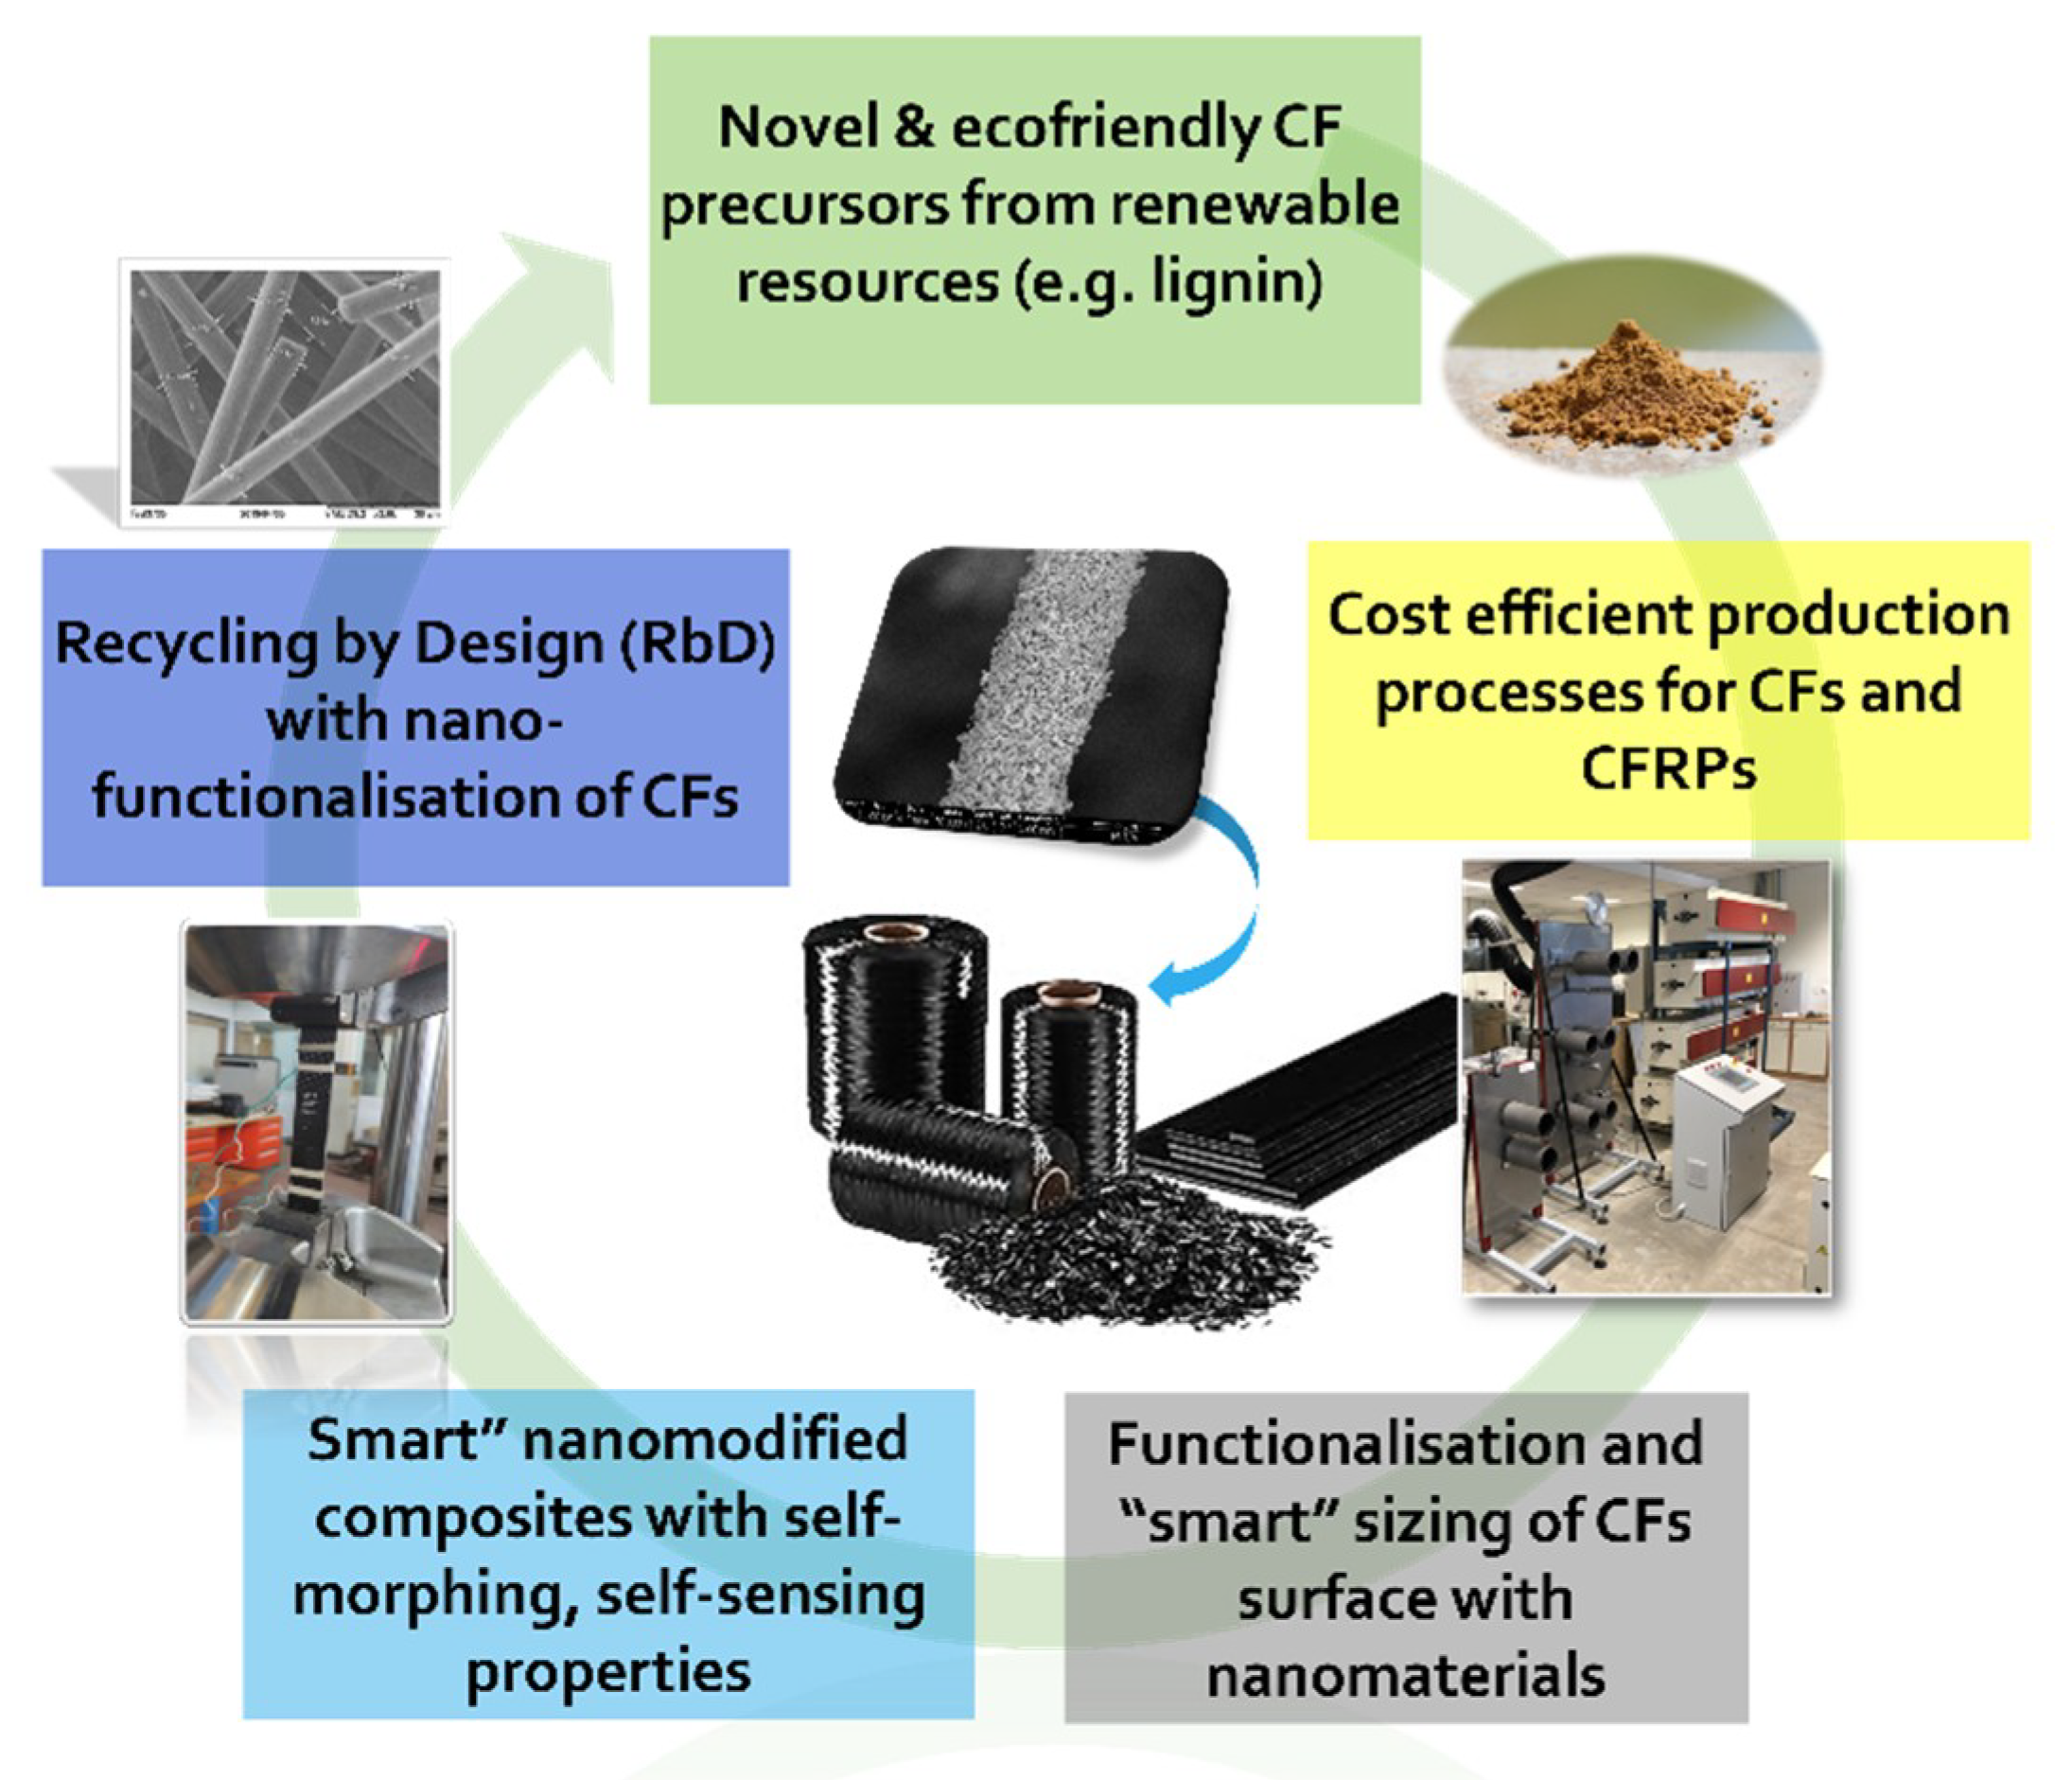 J. Compos. Sci. | Free Full-Text | Research and Development in Carbon Fibers  and Advanced High-Performance Composites Supply Chain in Europe: A Roadmap  for Challenges and the Industrial Uptake